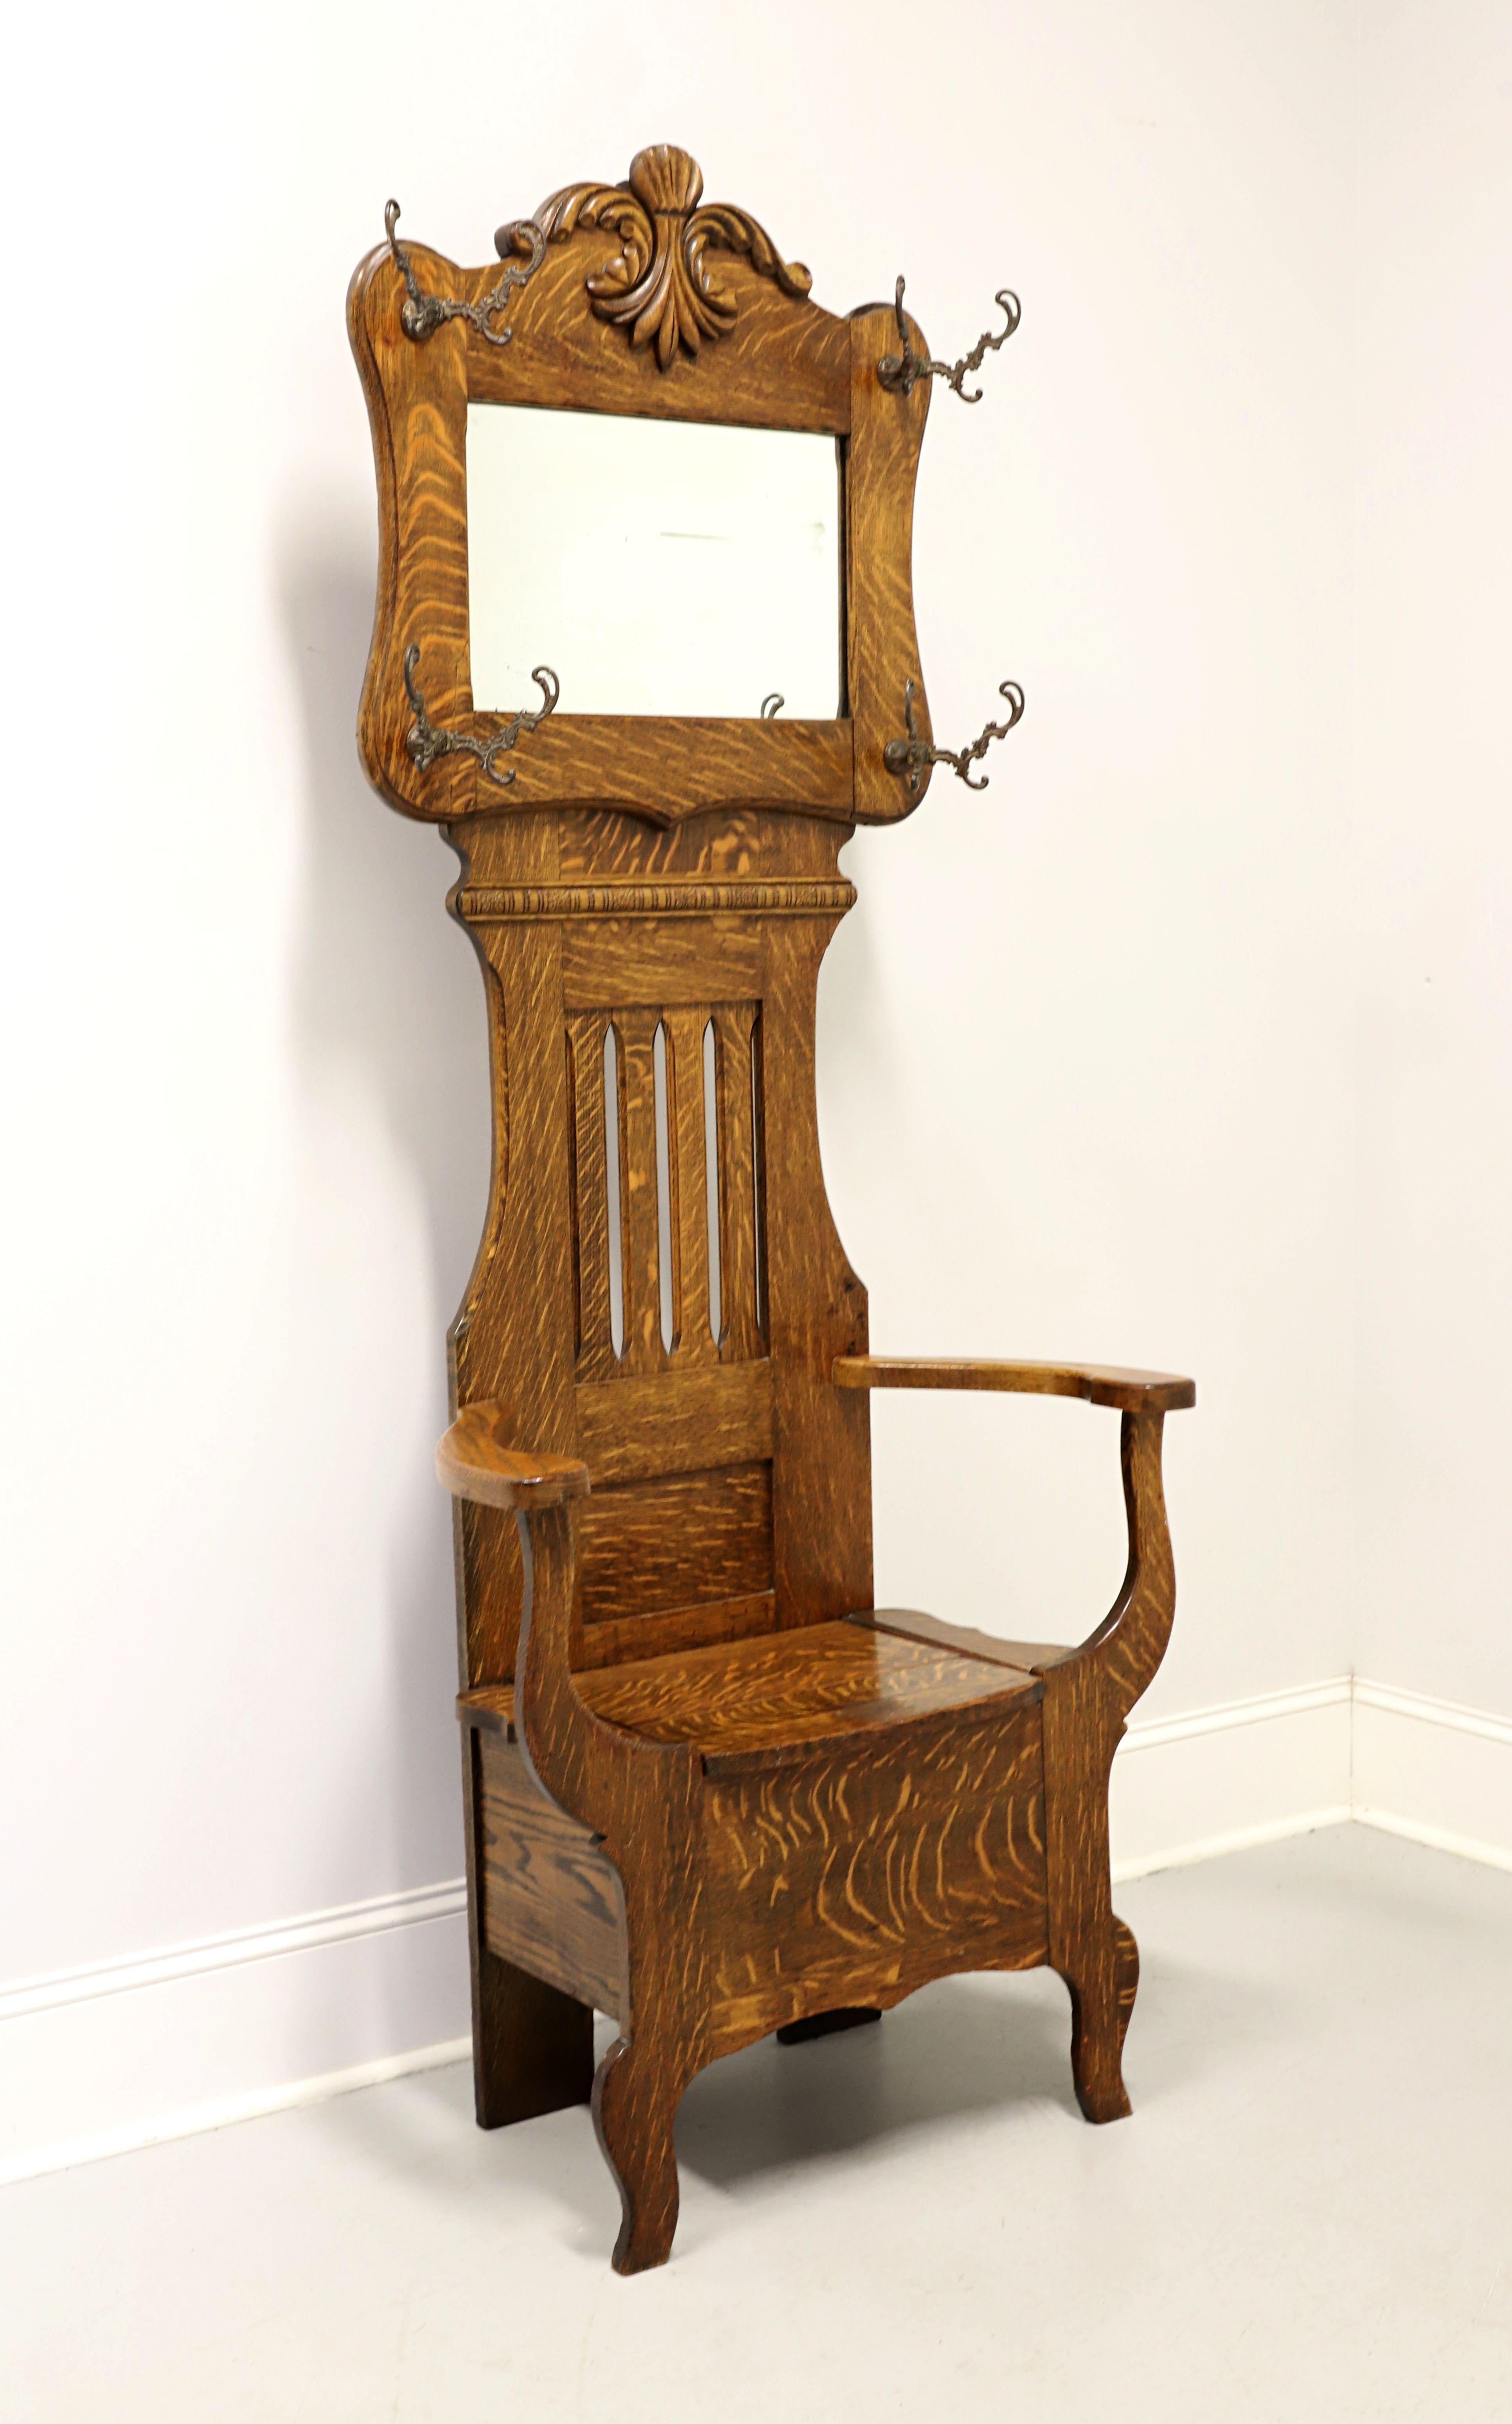 An antique Victorian period hall tree with mirror and chair bench, unbranded. Solid tiger oak with brass hooks and mirror. Features decoratively carved framed mirror at top with garment hooks, decorative open carved backrest providing mirror